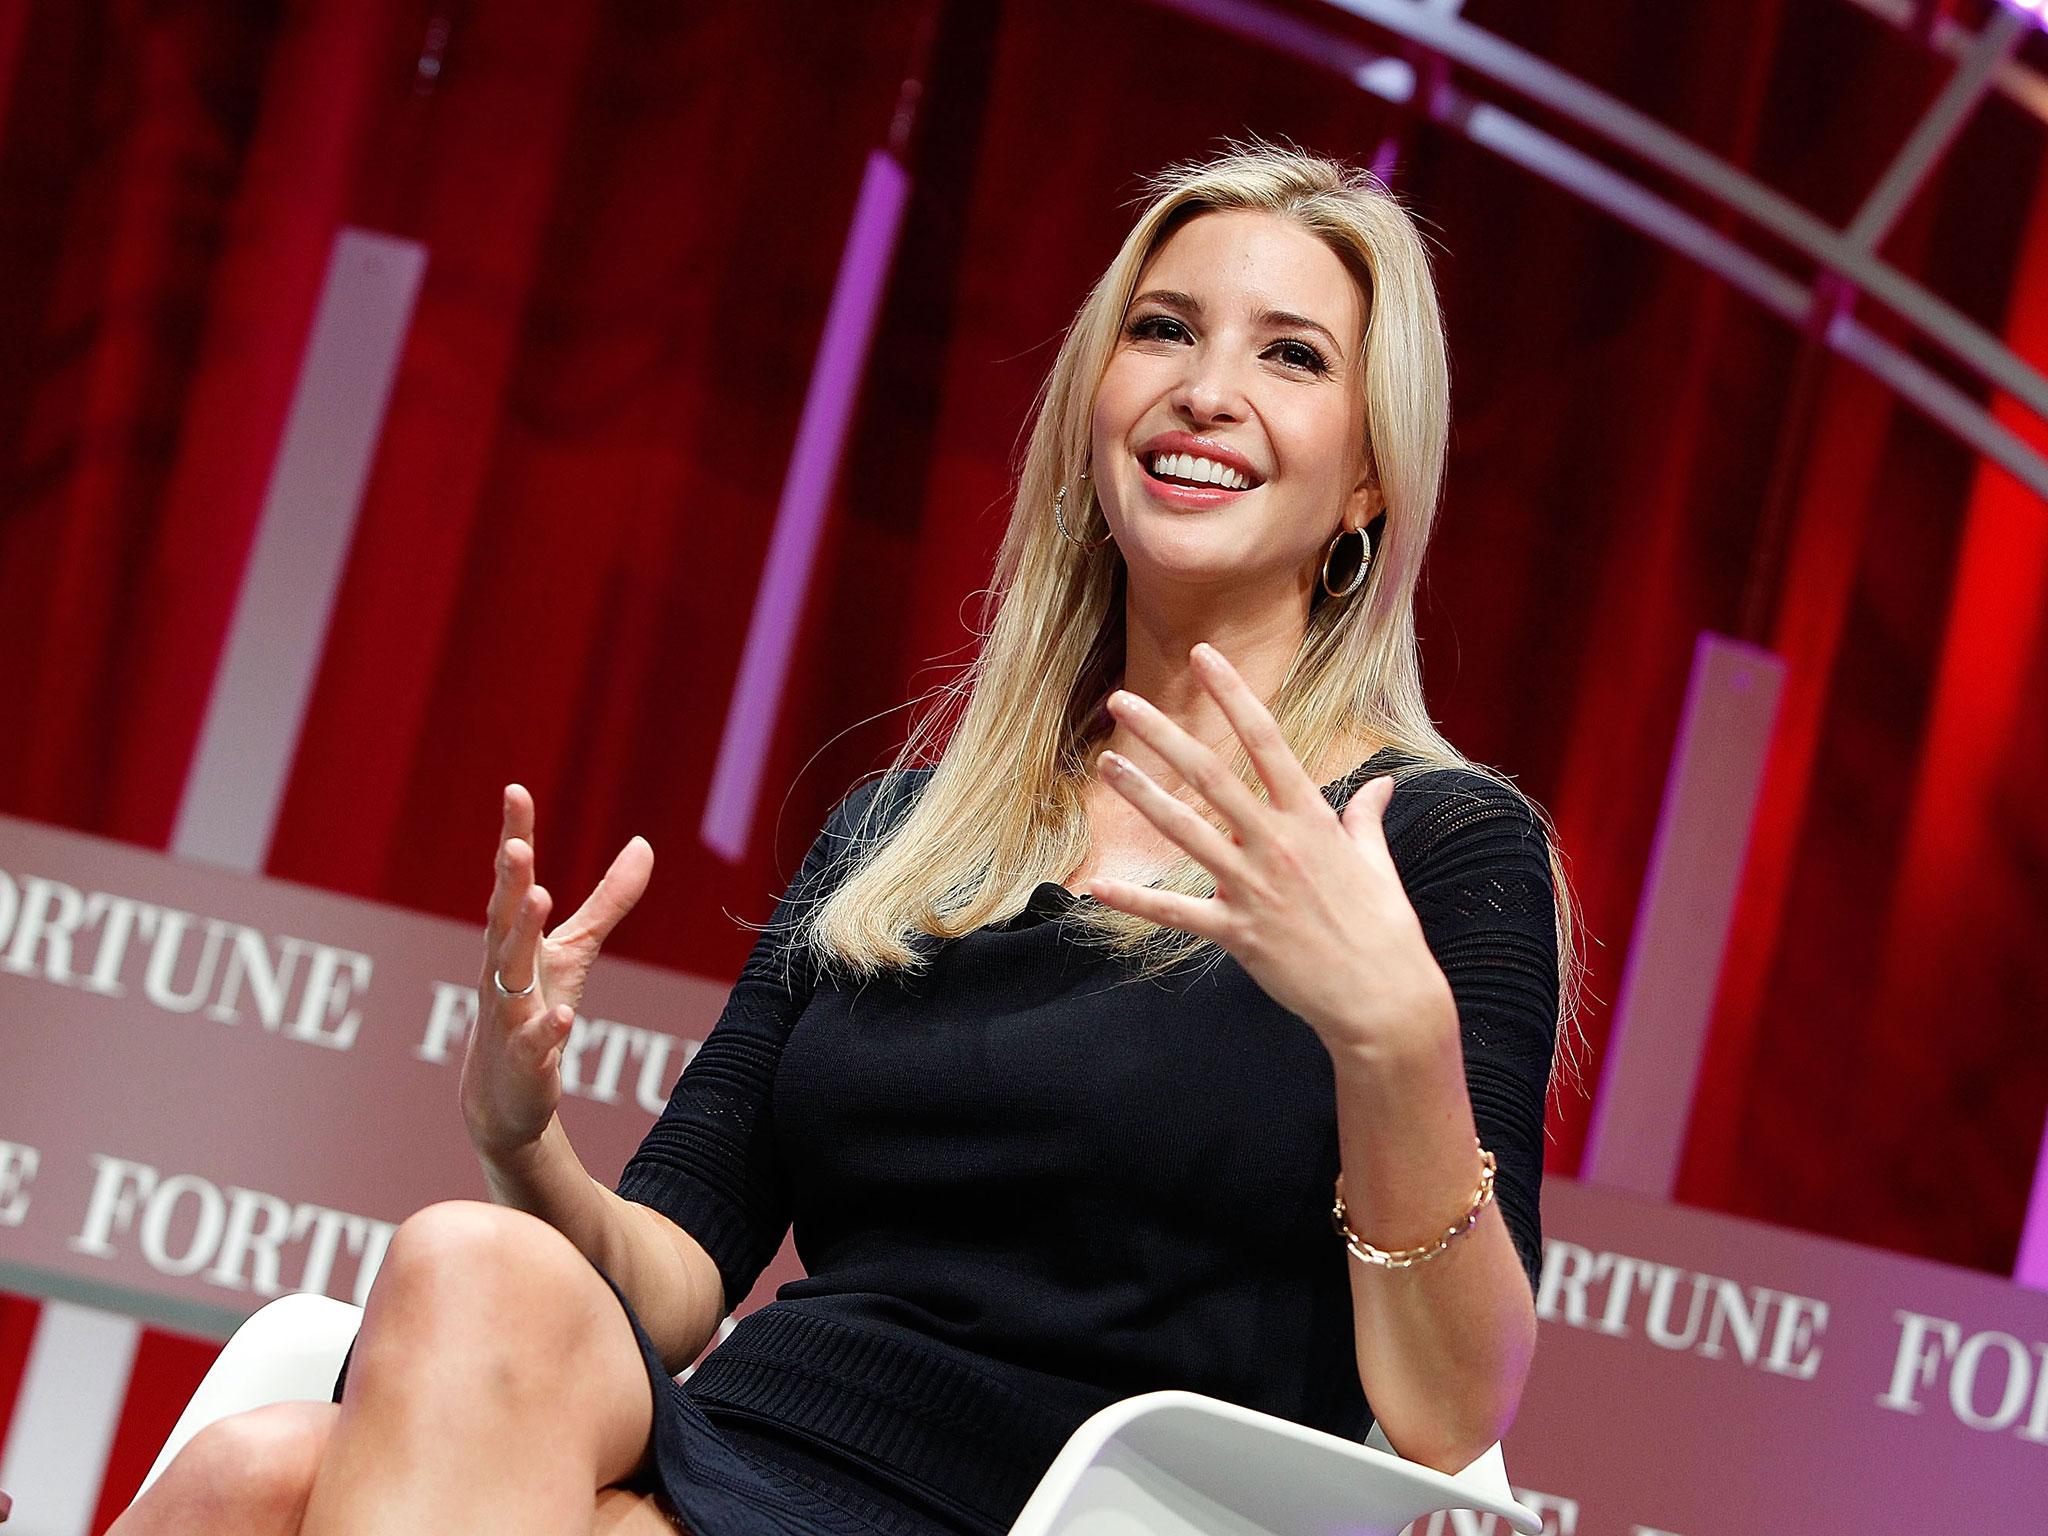 According to the South China Morning Post, at least 65 companies, ranging from alcohol retailers to wallpaper companies, have applied to use the name ‘Ivanka’ as their trademark